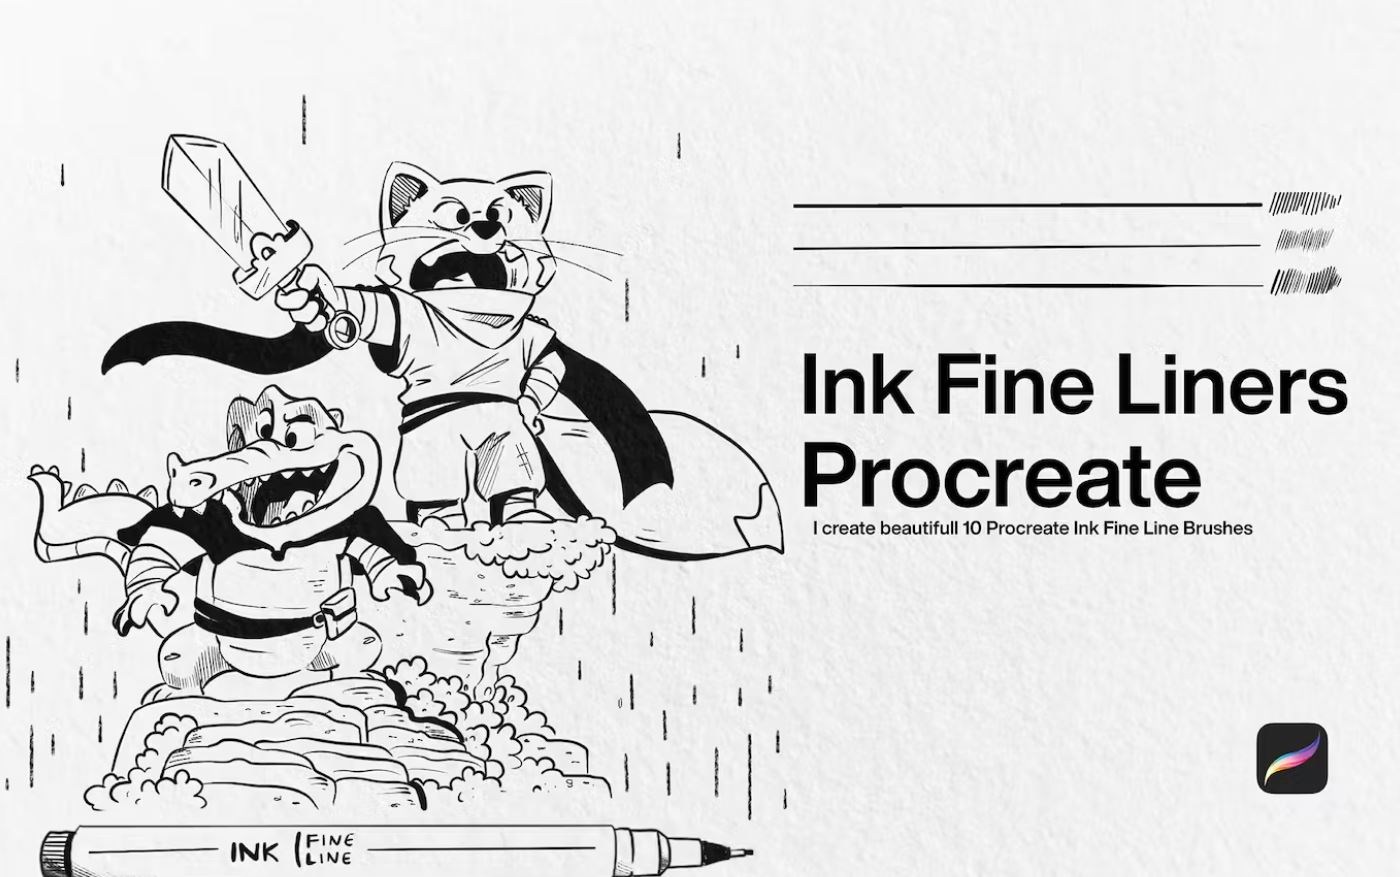 Creative liners ink procreate brushes set